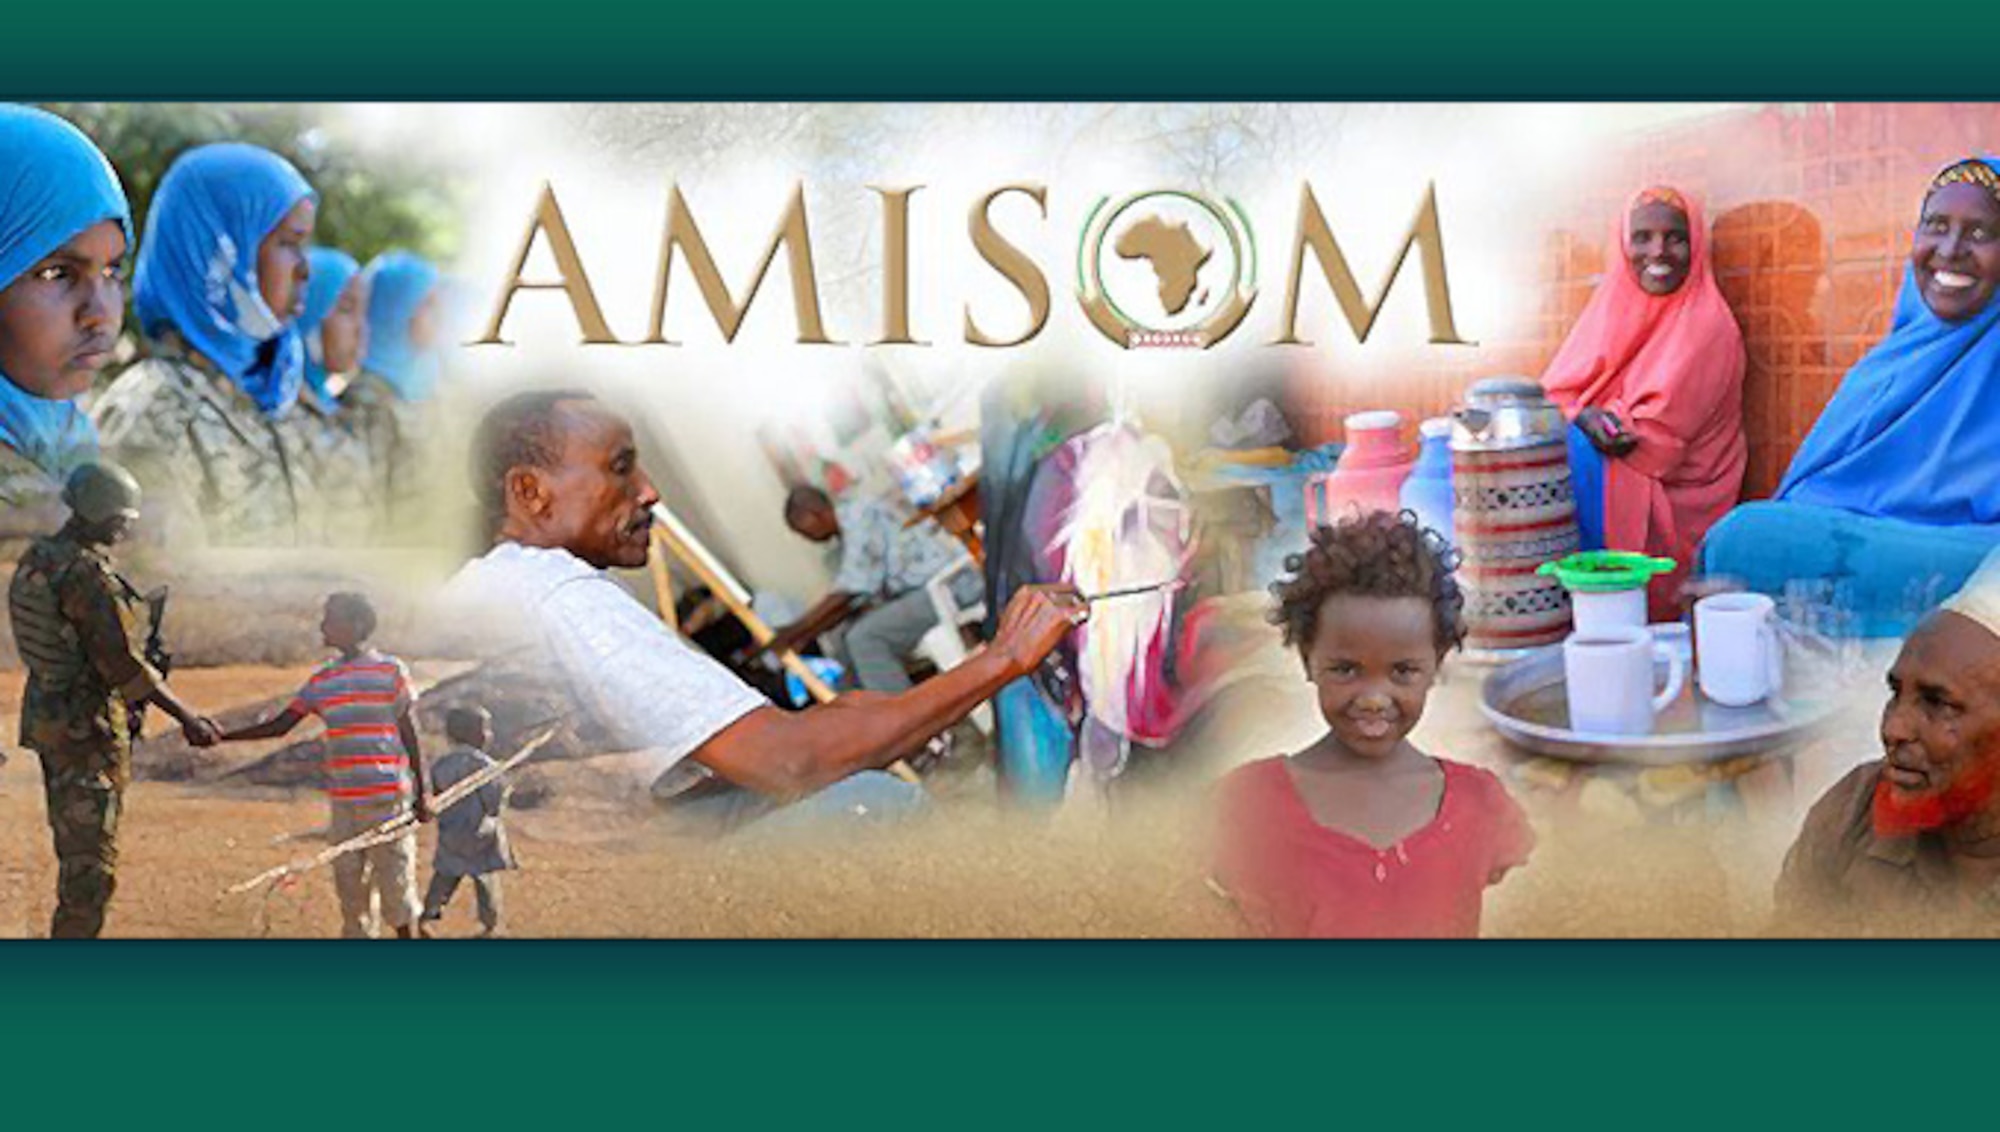 Artist's digital design using photo portaying the group's mission in Somalia from AMISOM's facebook page
https://www.facebook.com/amisom.somalia